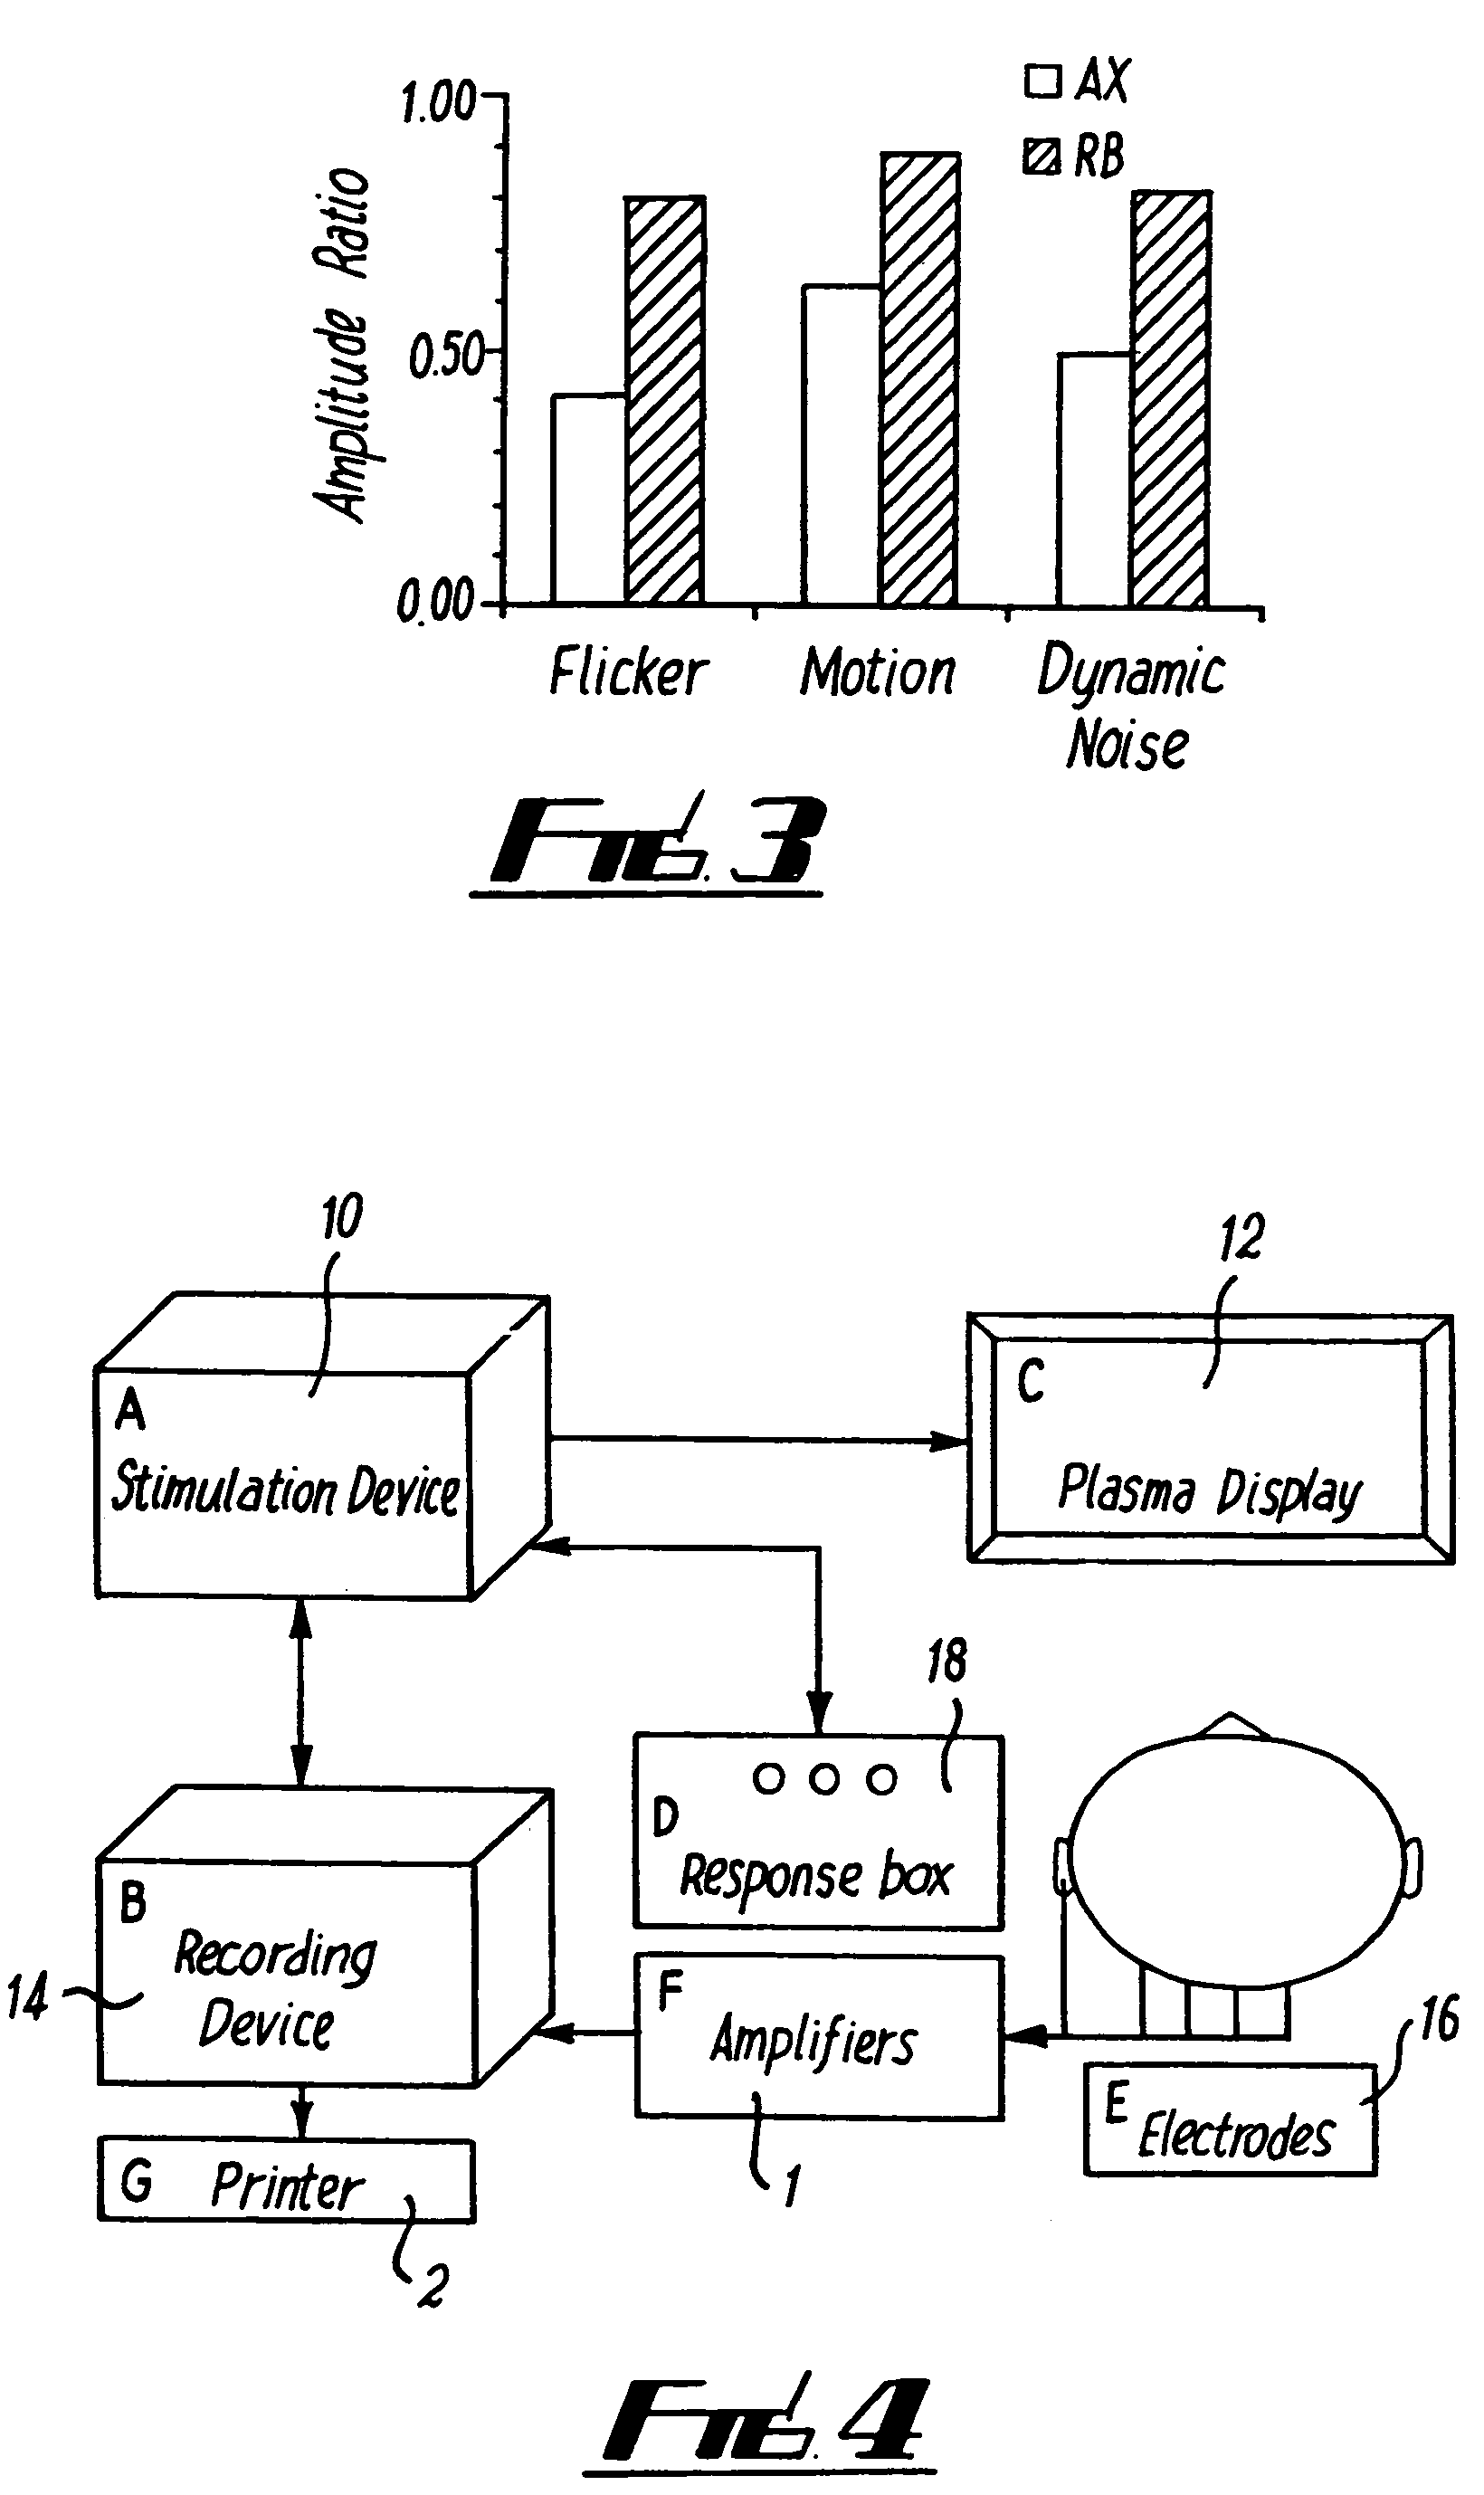 Systems and apparatus for assessment of visual field functions